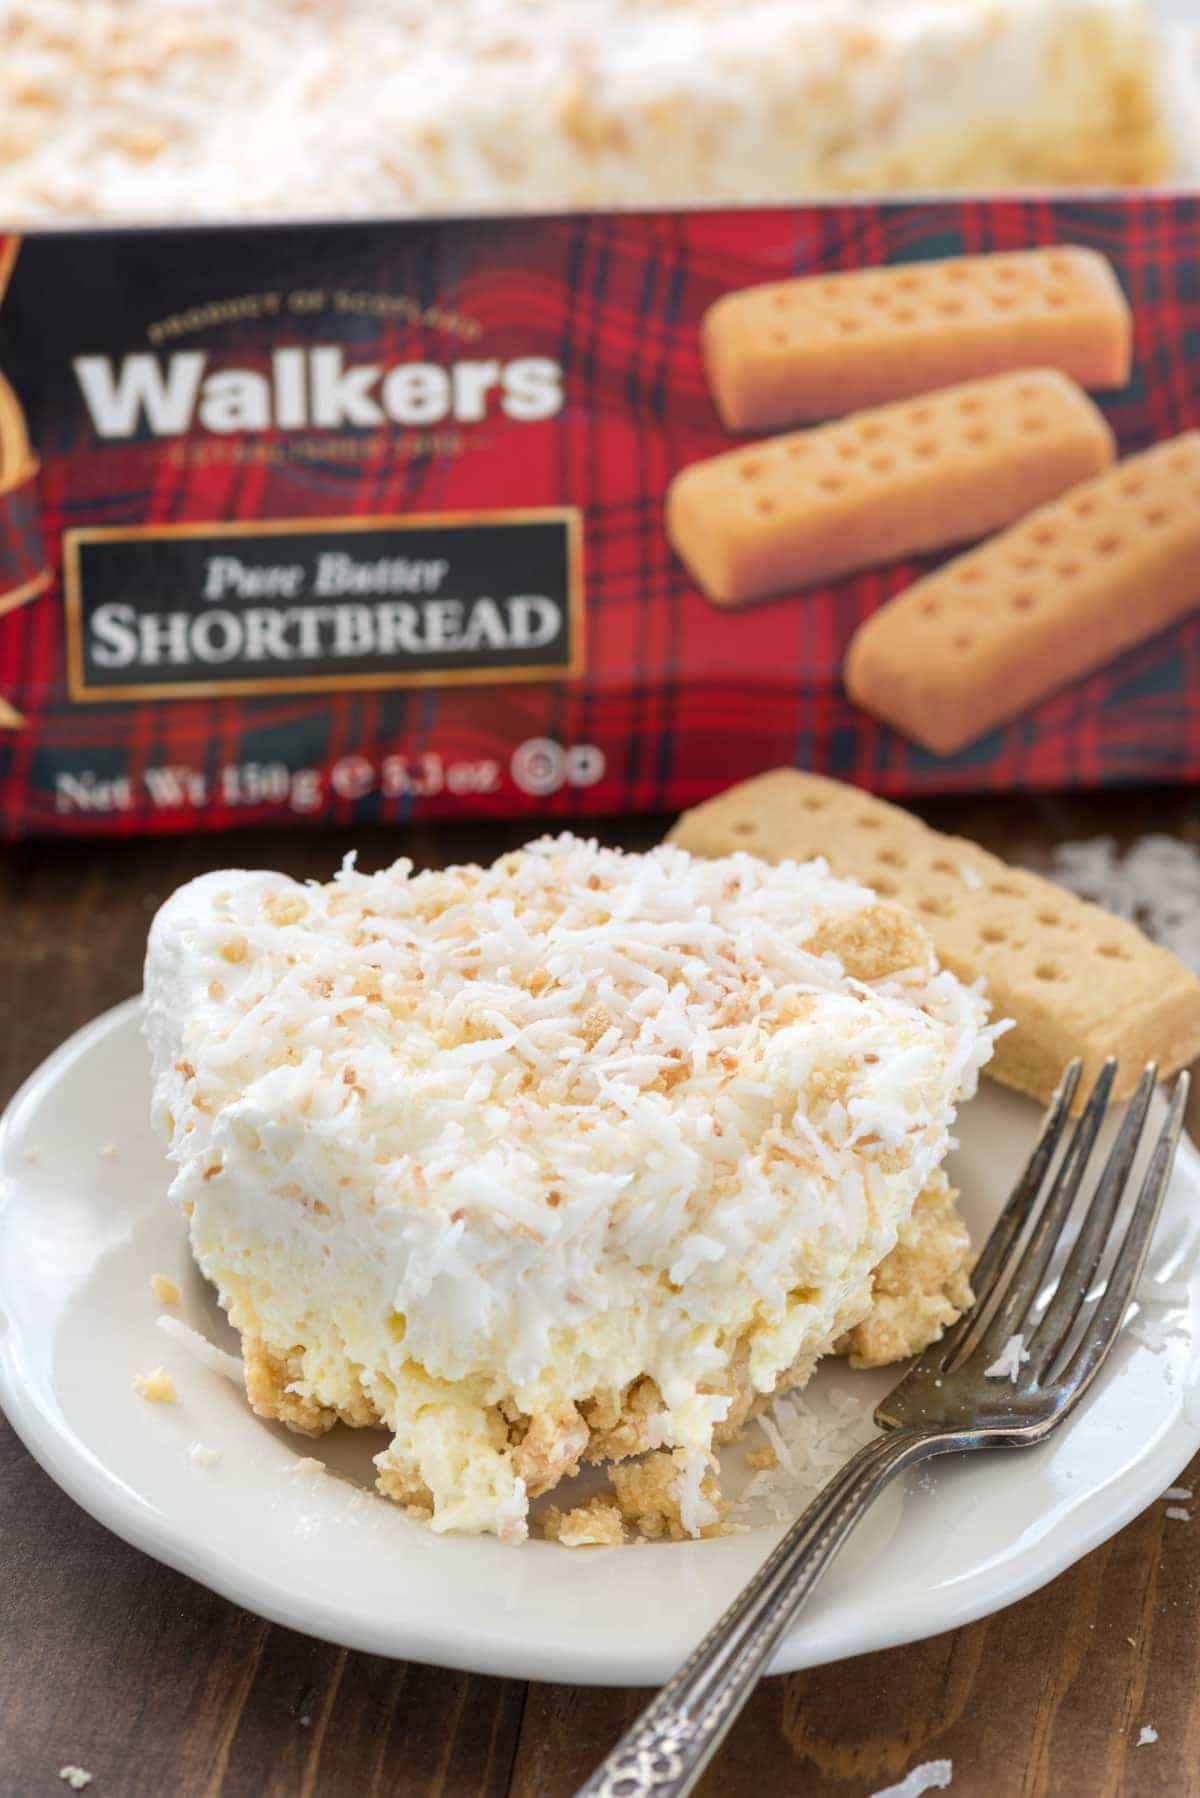 Coconut Cheesecake No Bake Dessert Recipe made with a Walkers Shortbread Cookie Crust